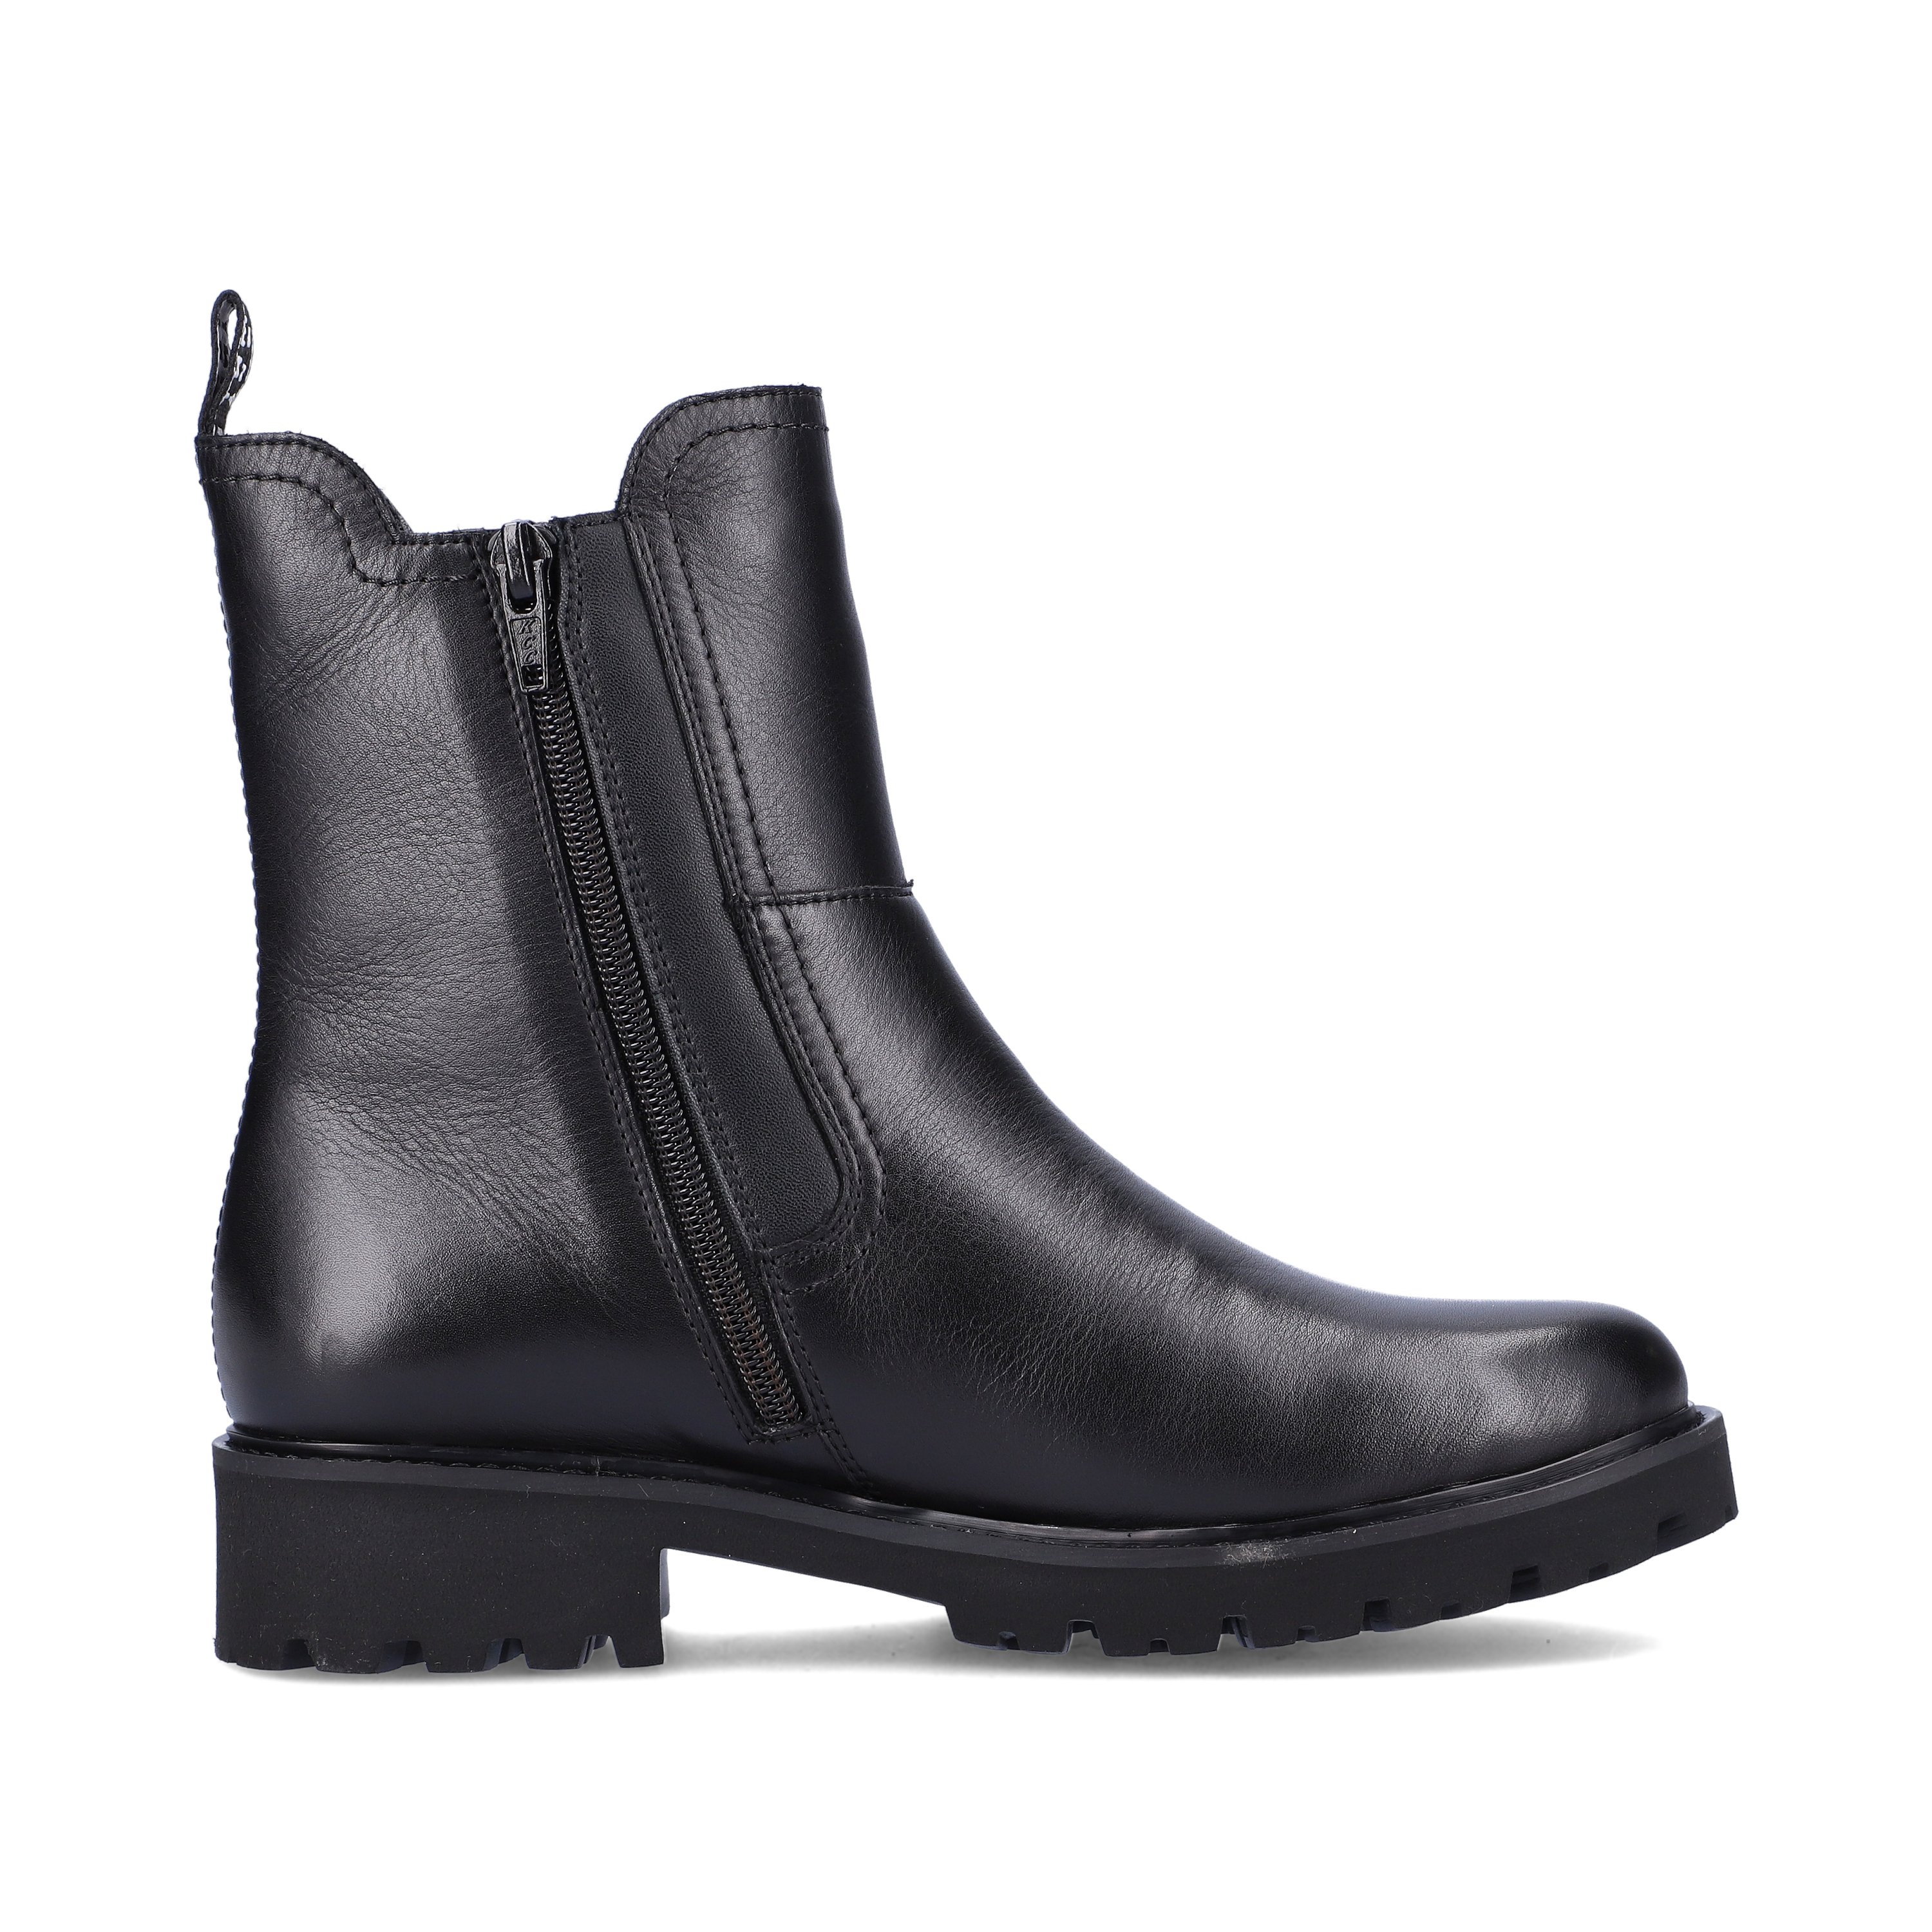 Graphite black remonte women´s Chelsea boots D8694-00 with cushioning sole. Shoe inside